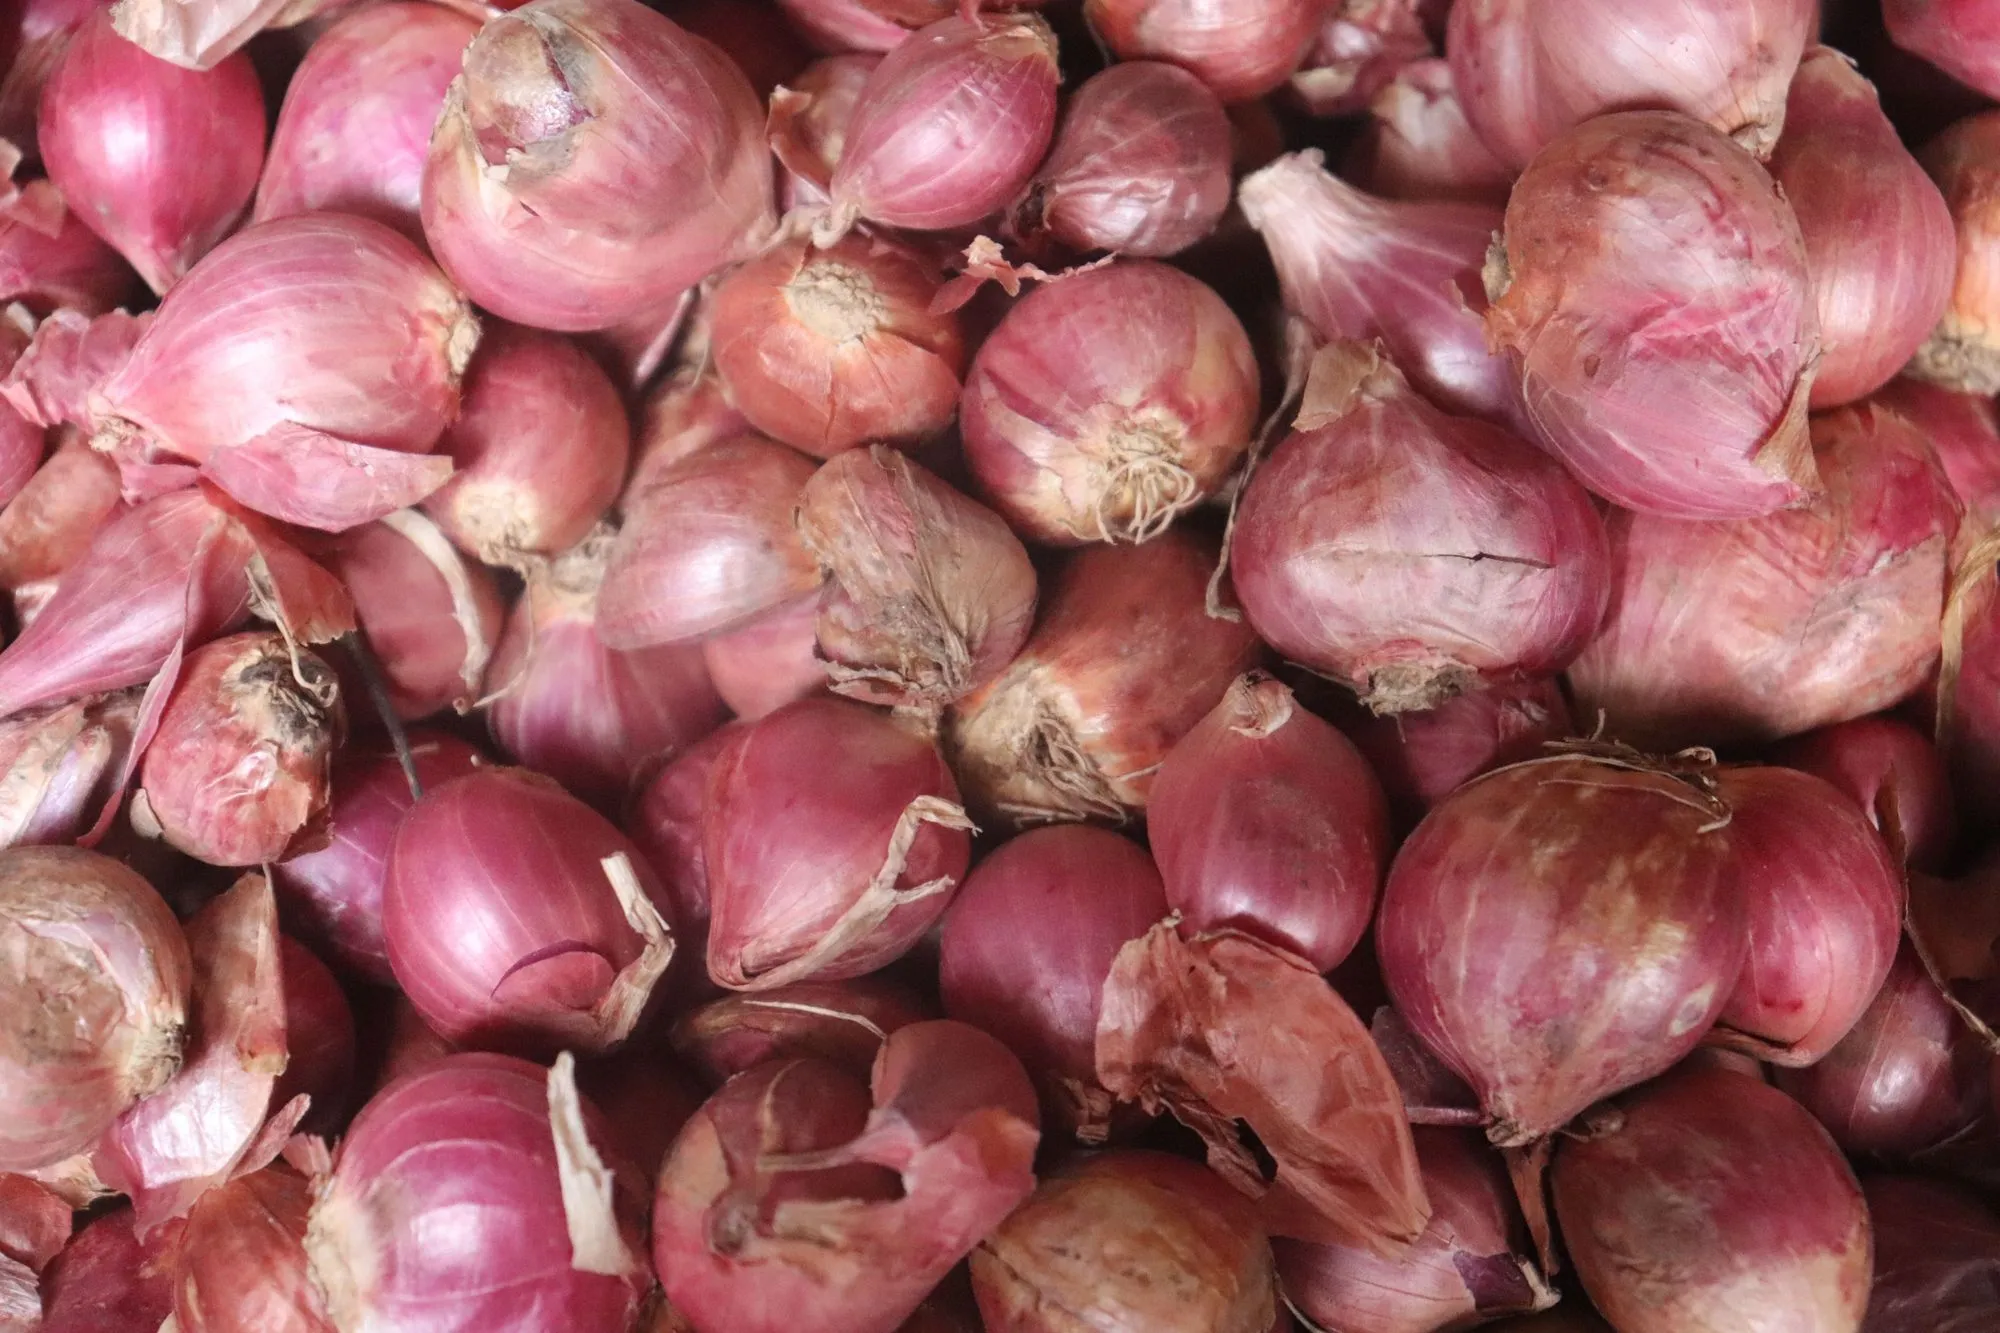 Onions form the base of many delicious dishes, and the important thing is that the whole plant is edible!